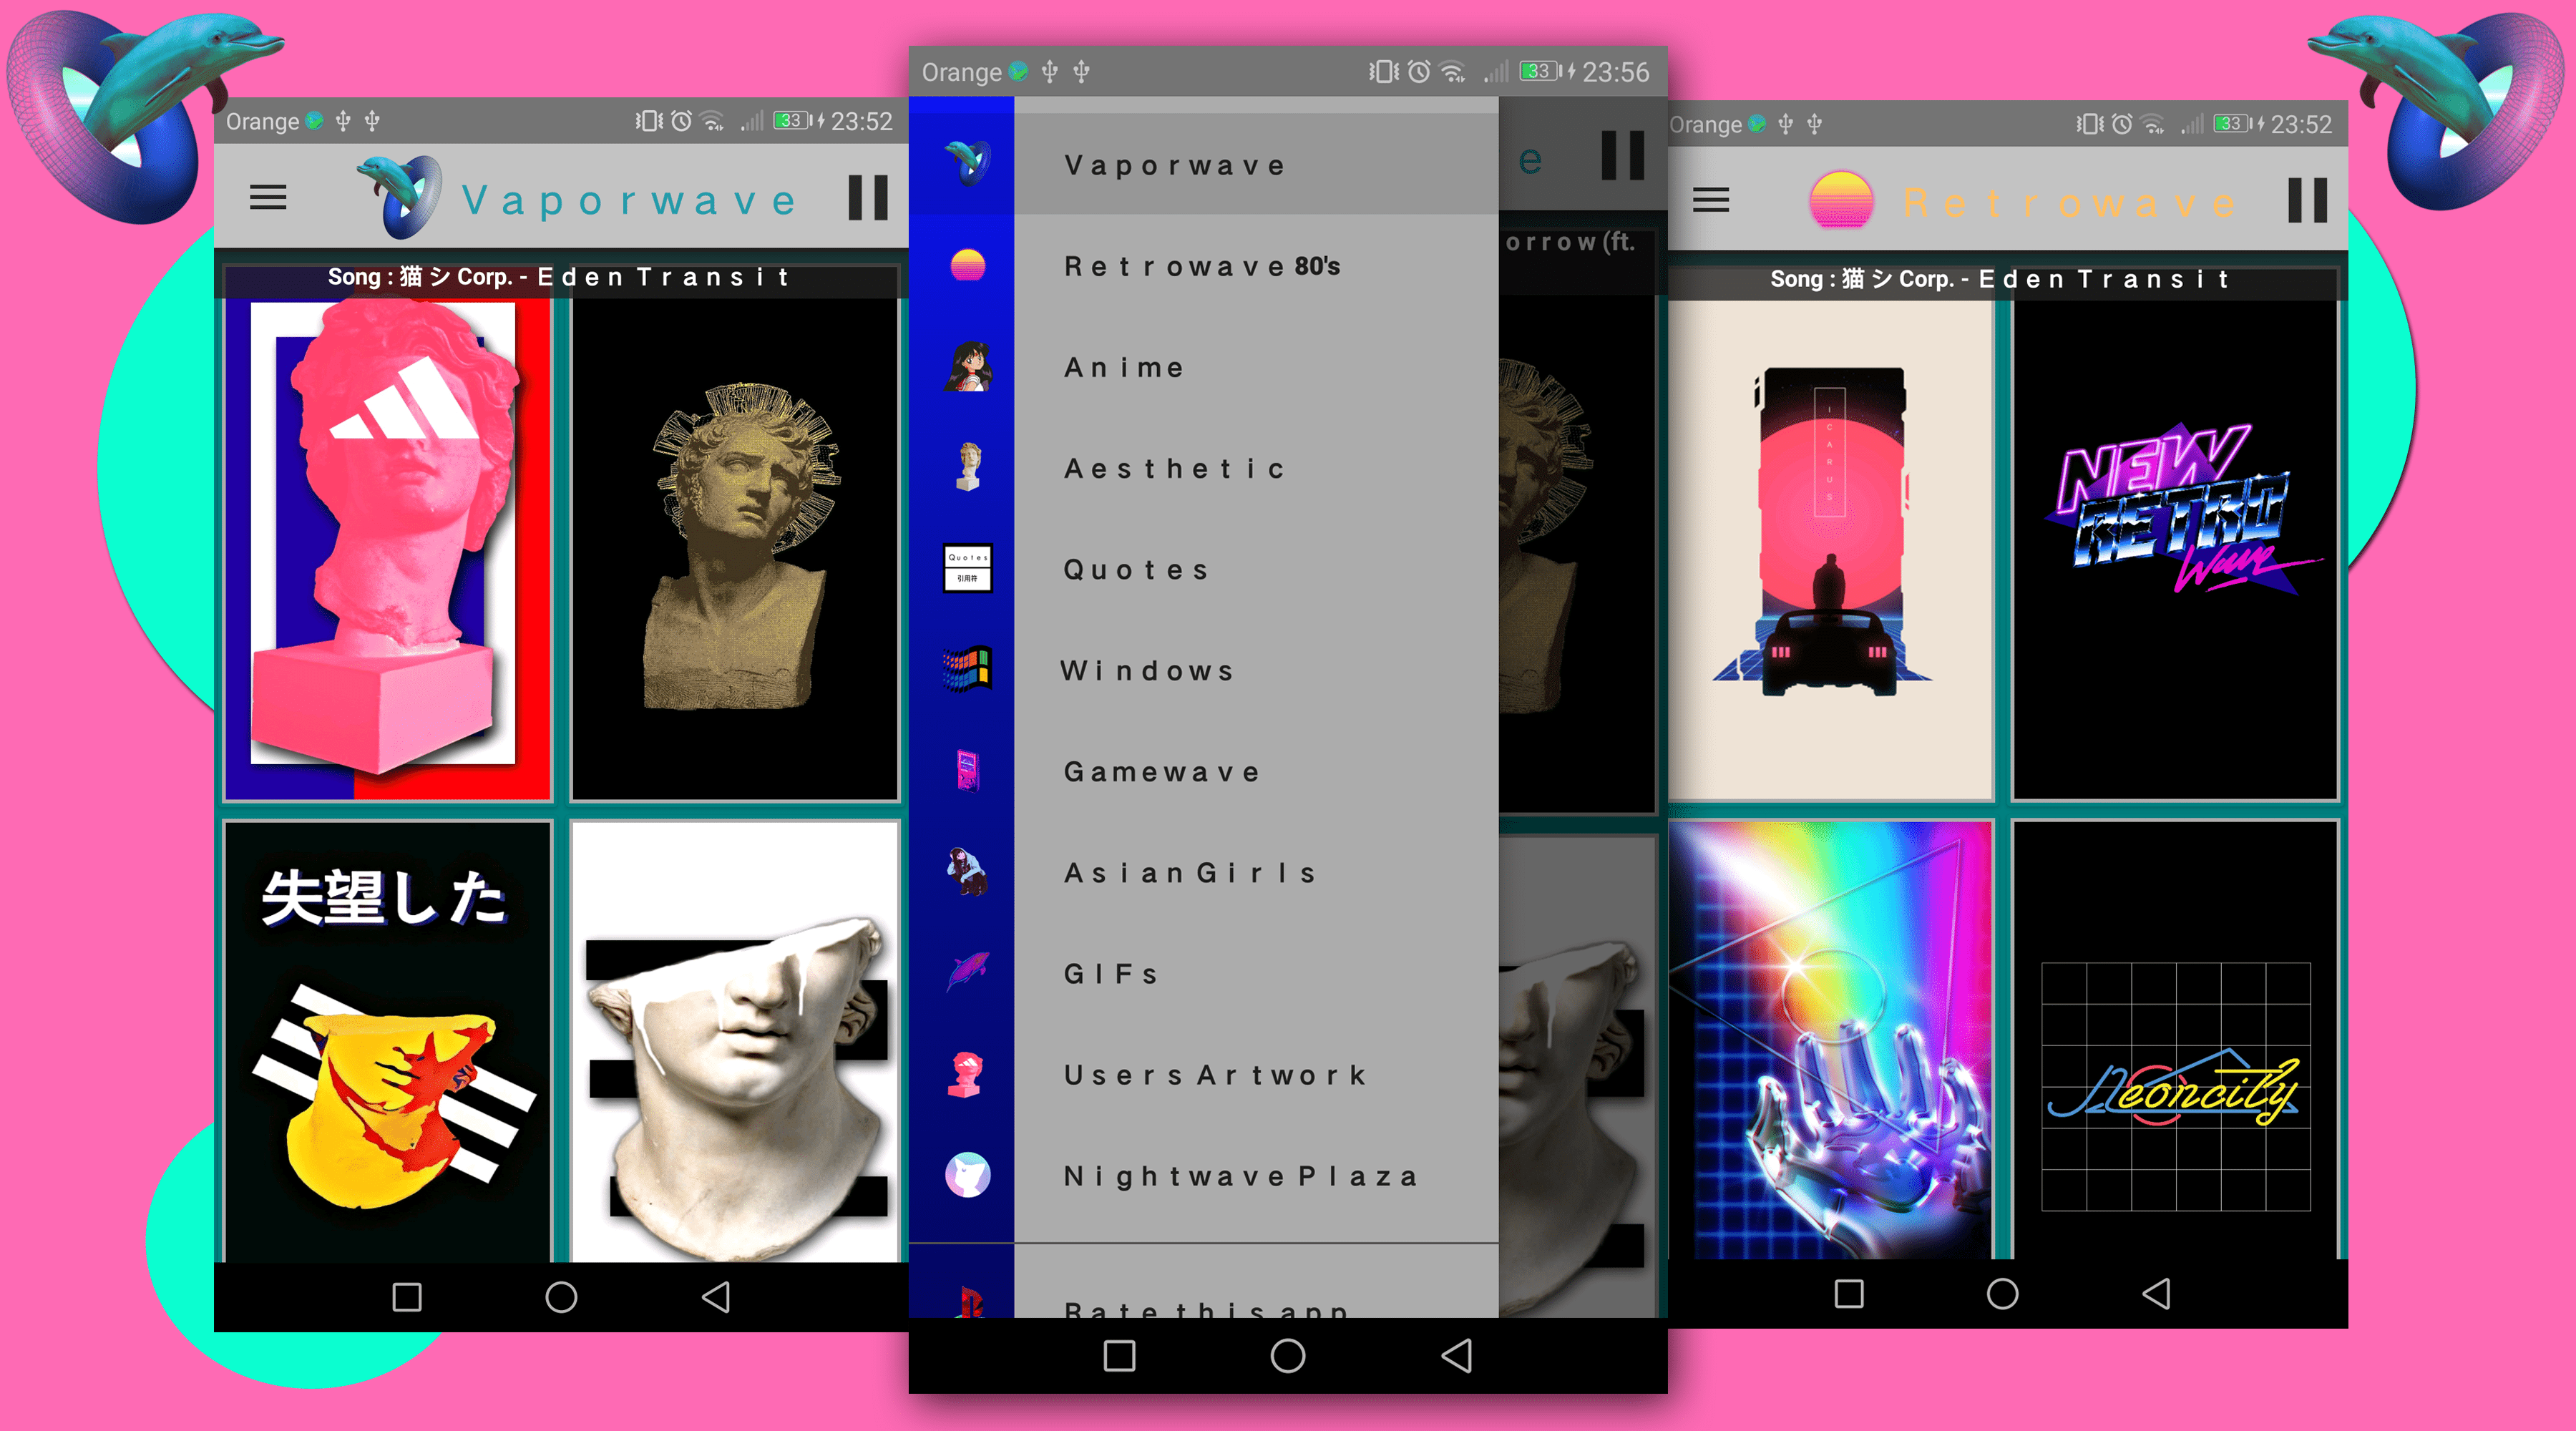 A smartphone displaying various images on its screen - Vaporwave